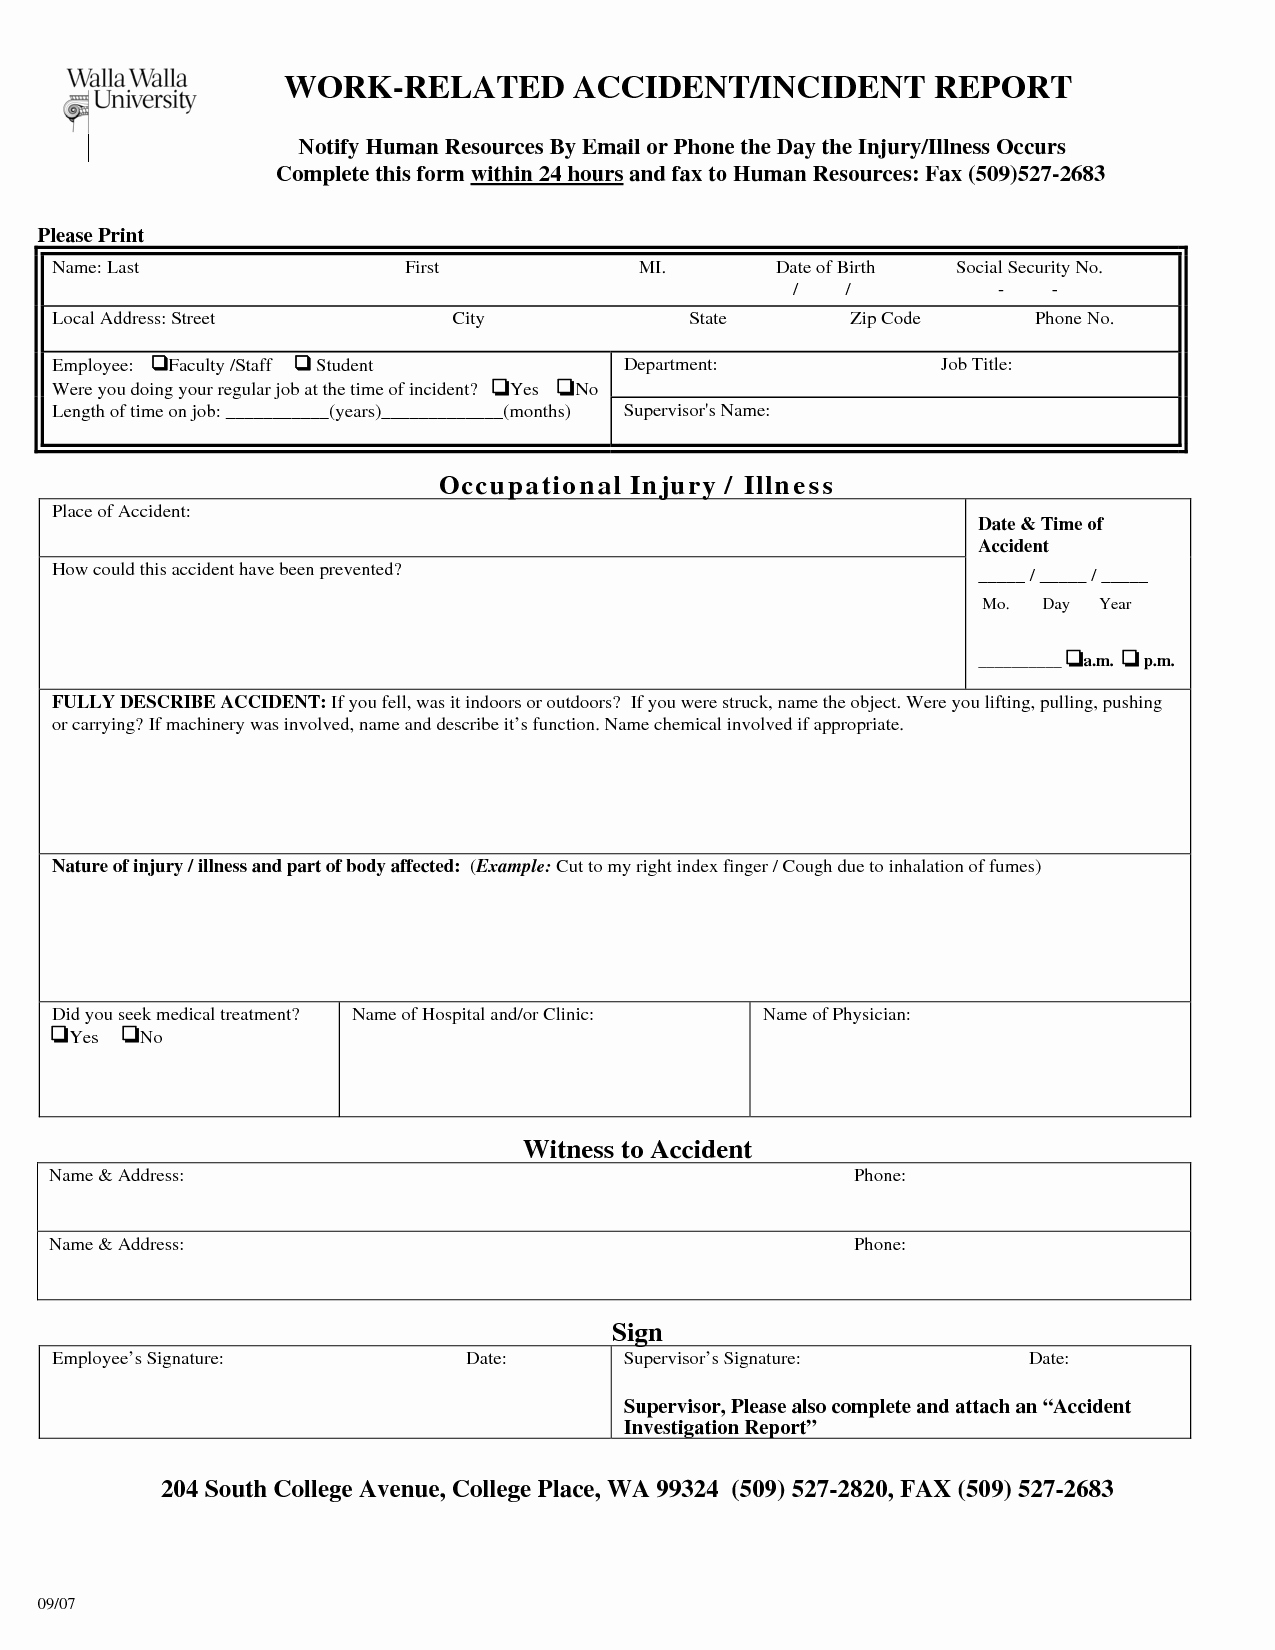 Workplace Accident Report form Awesome Best S Of Human Resources Incident Report Template